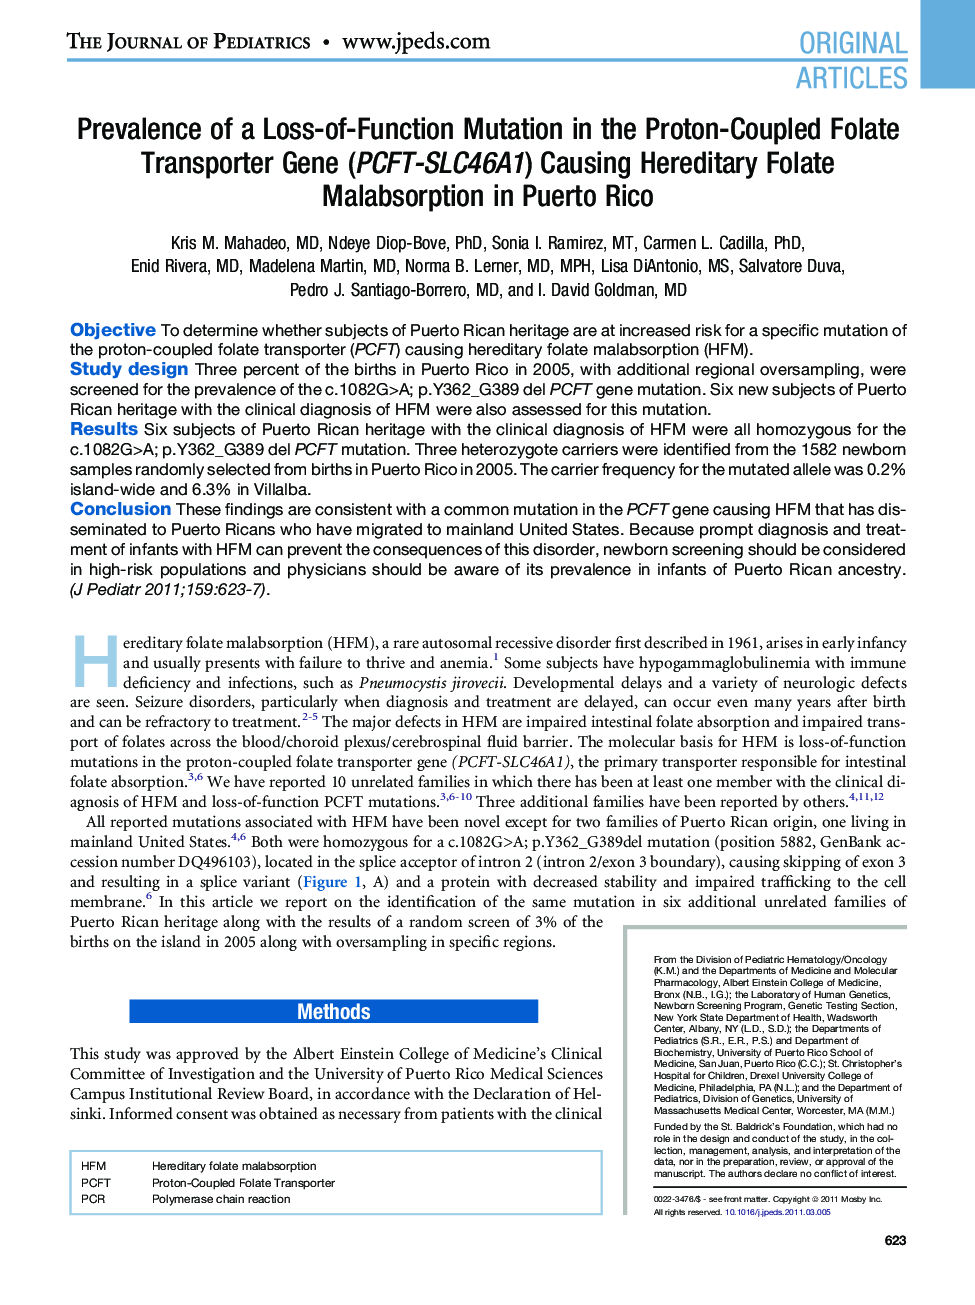 Prevalence of a Loss-of-Function Mutation in the Proton-Coupled Folate Transporter Gene (PCFT-SLC46A1) Causing Hereditary Folate Malabsorption in Puerto Rico